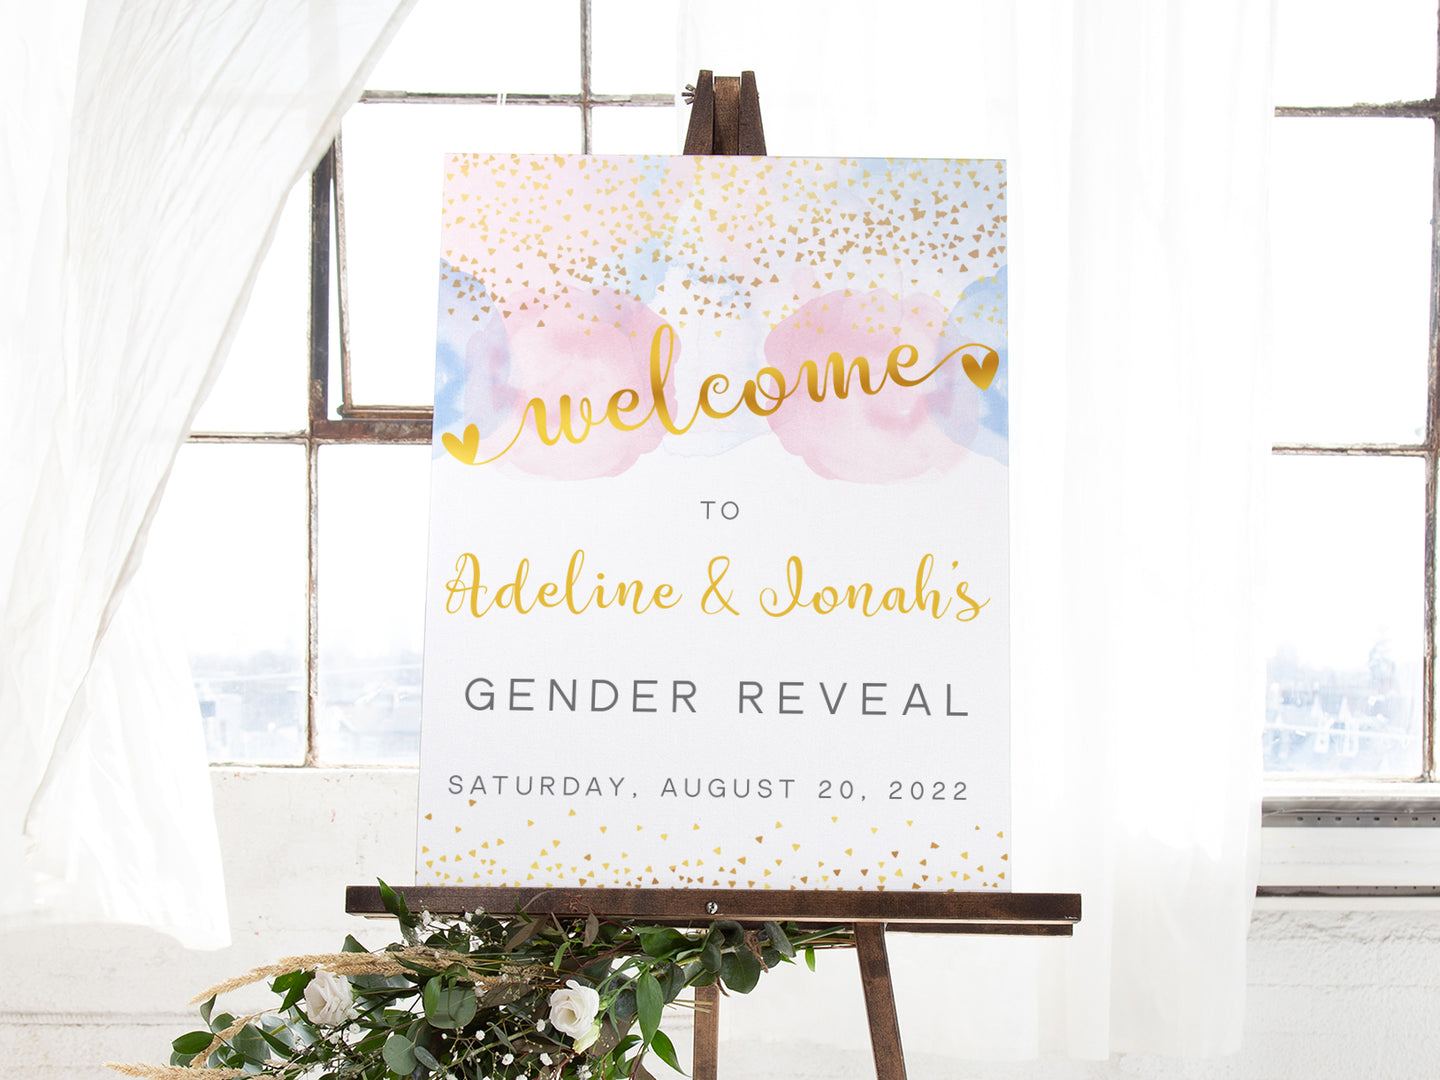 Blue and Pink Smoke with Gold Confetti, Gender Reveal Welcome sign on easel